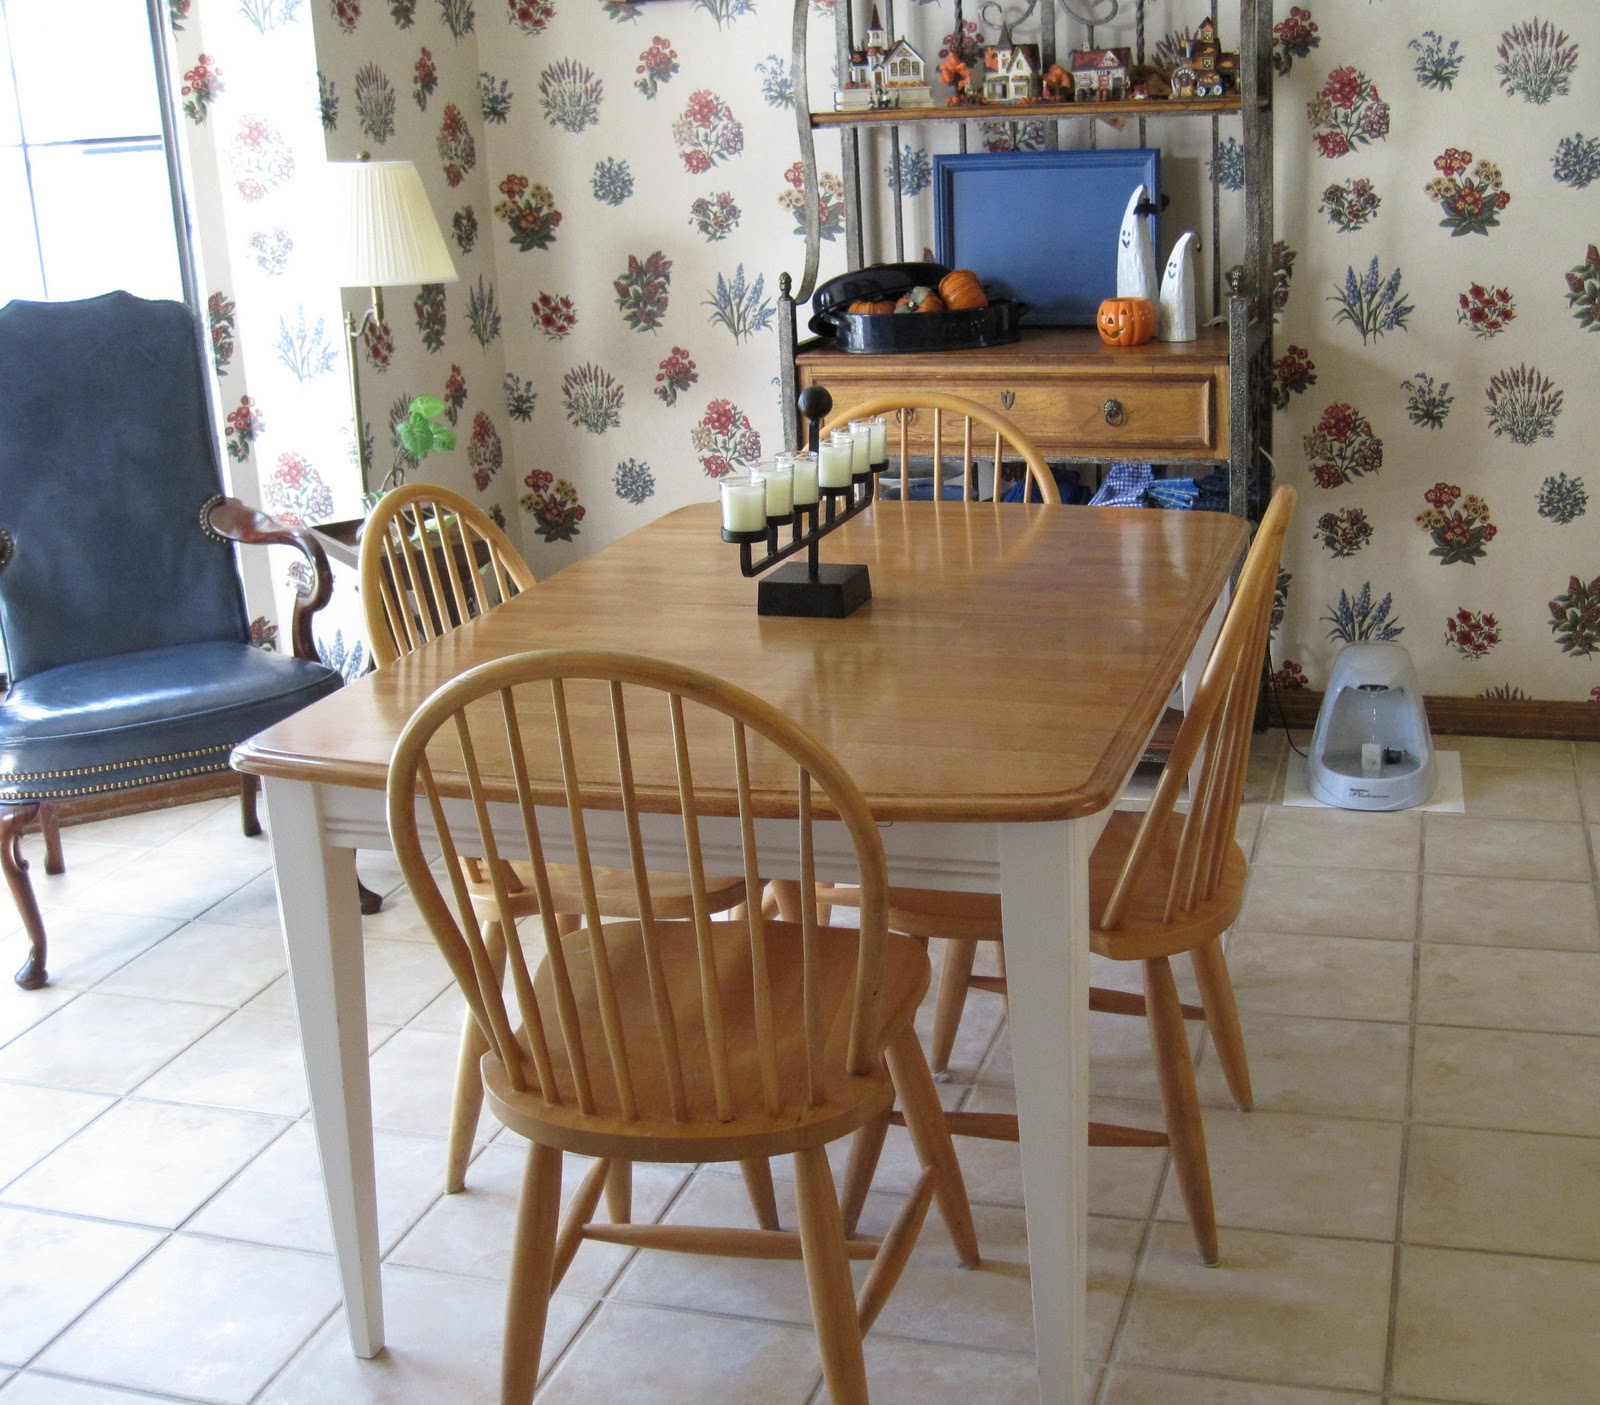 The Dull and the Dutiful: New Breakfast Table!